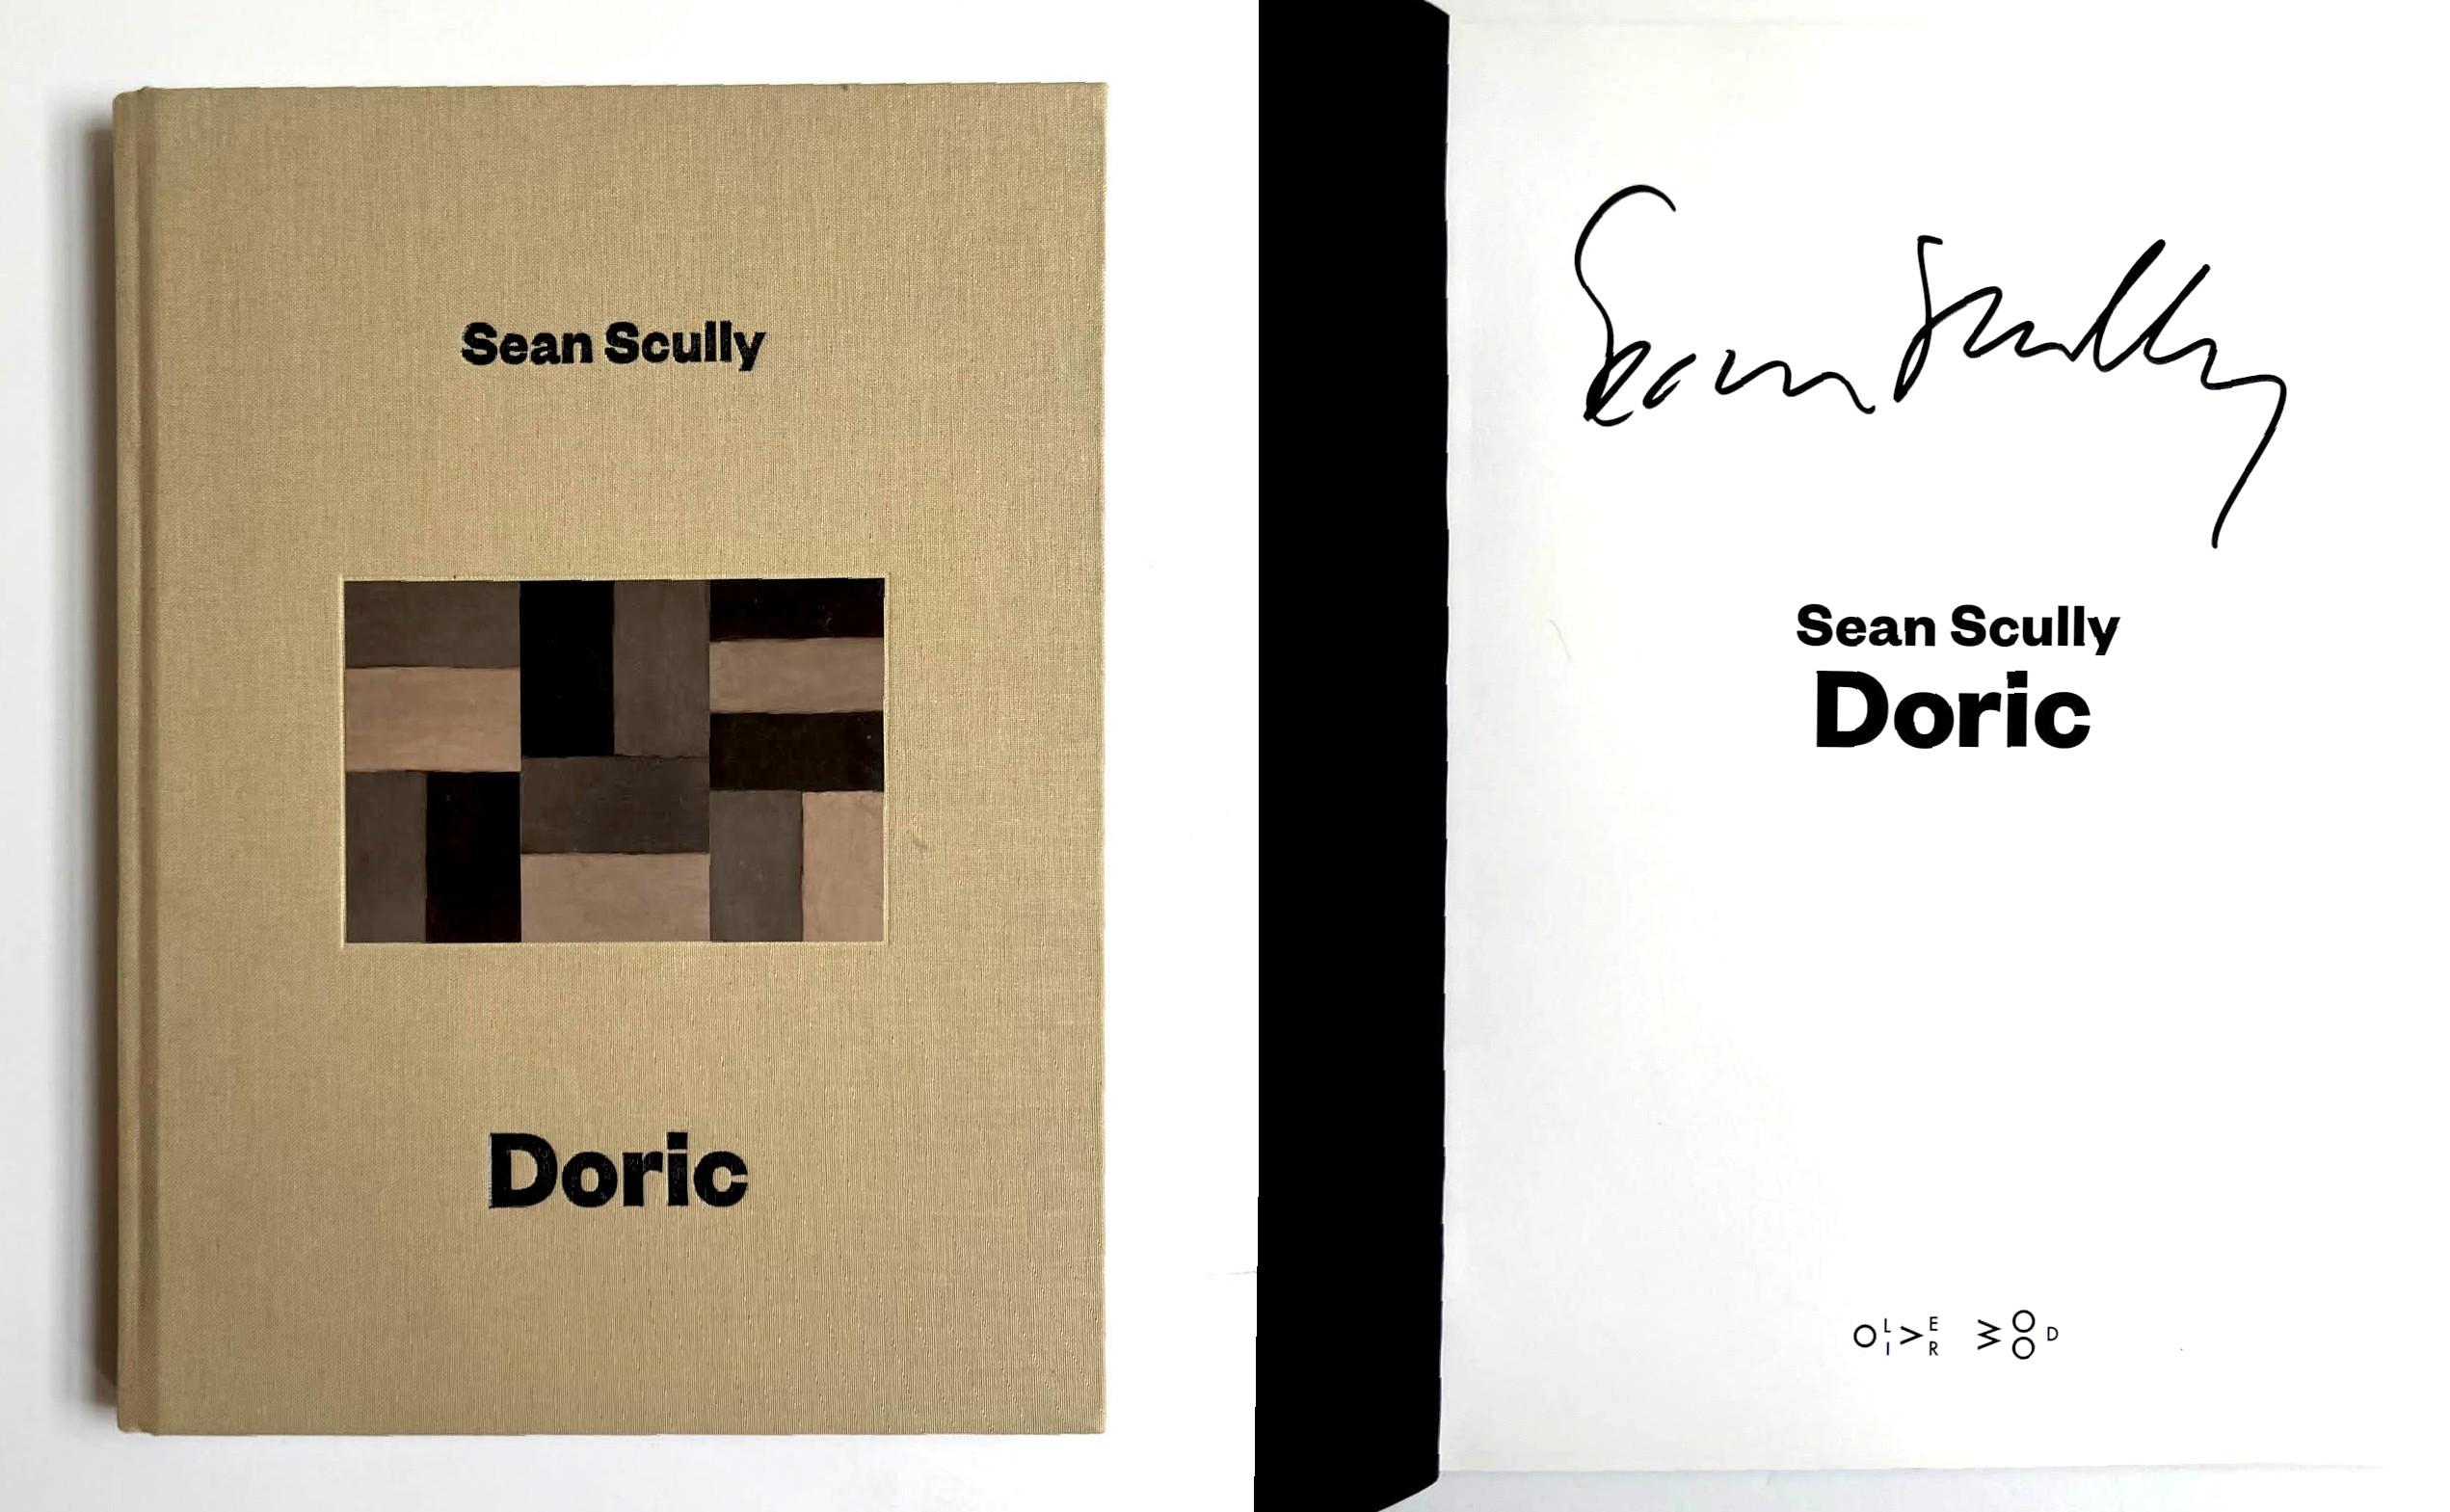 Doric (Hand signed by Sean Scully)